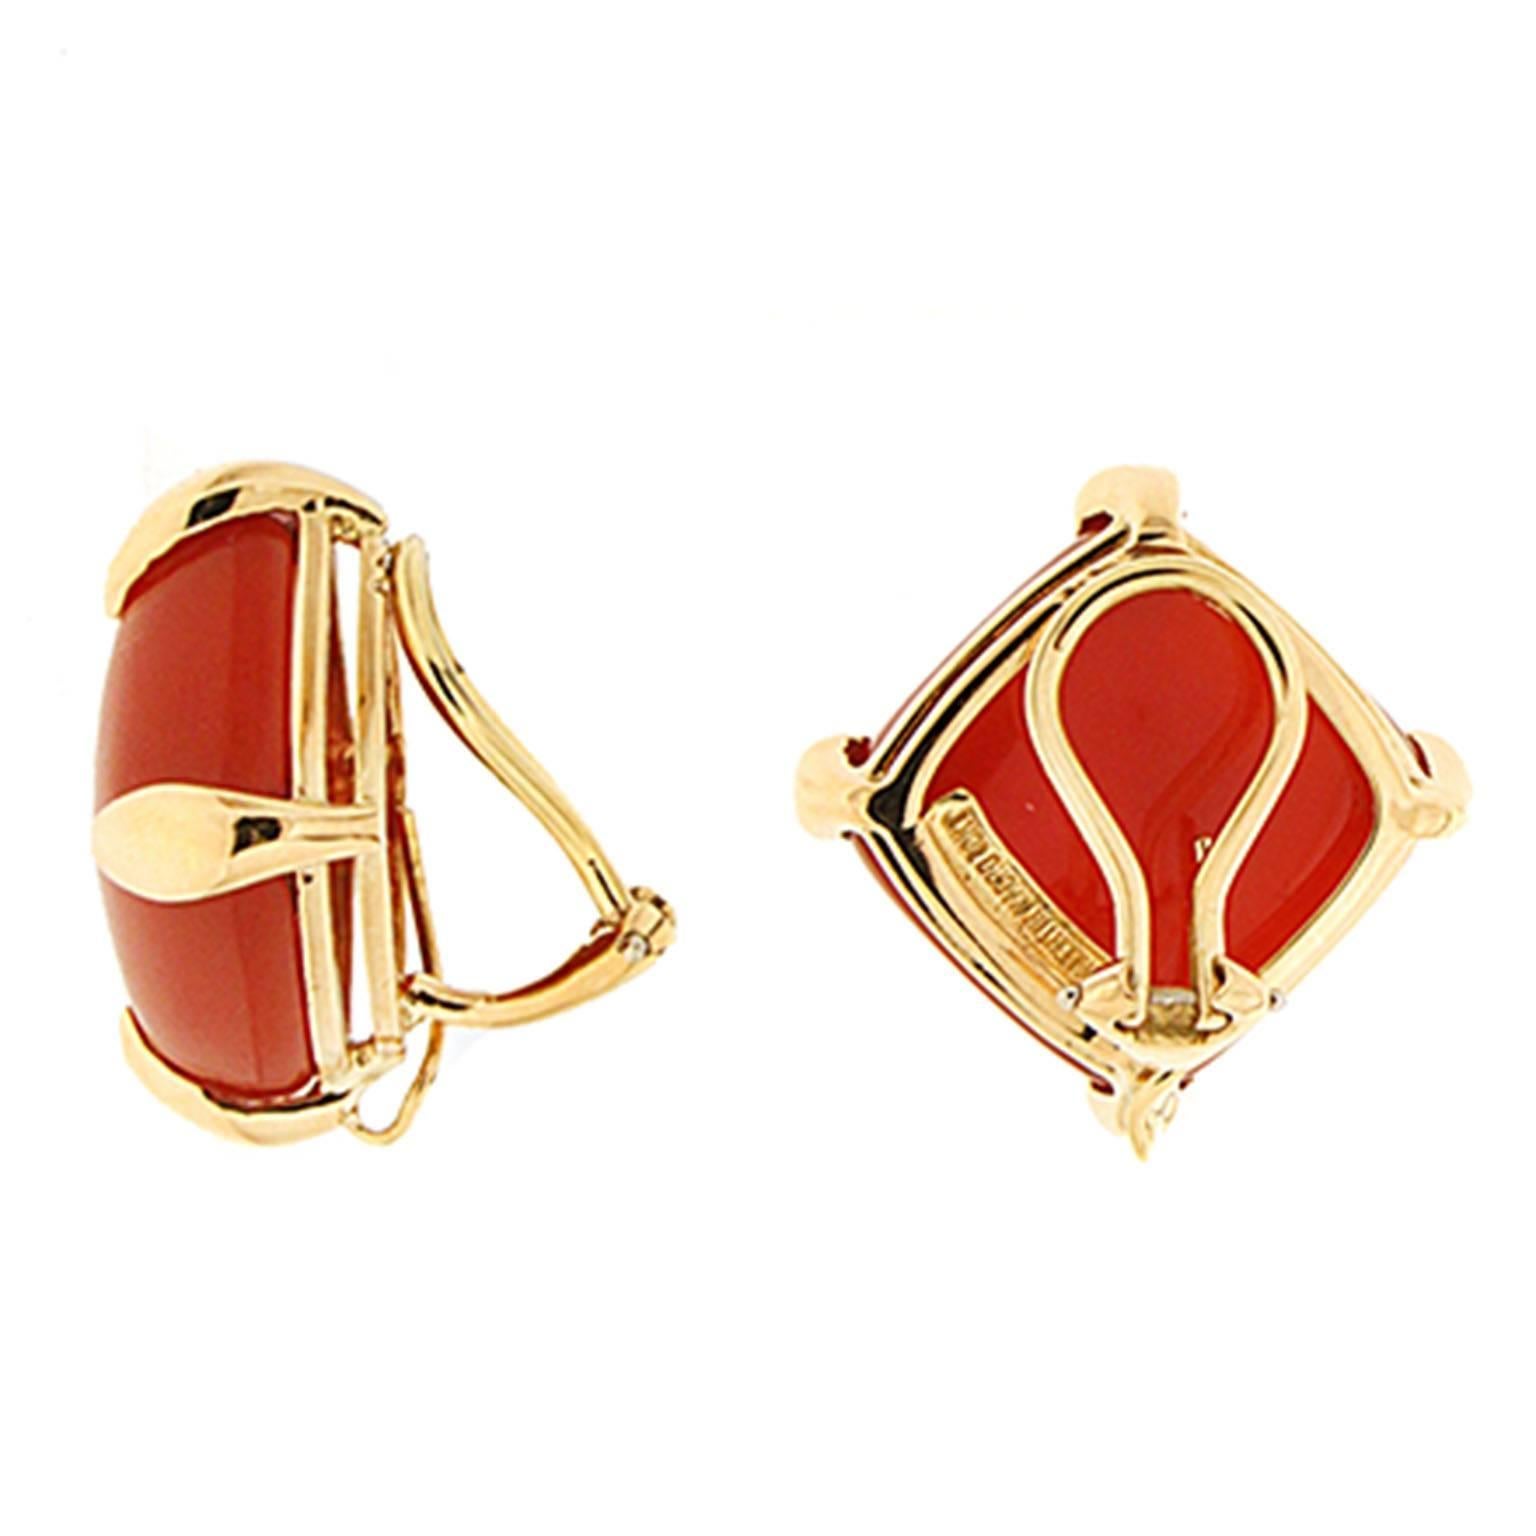 Earrings with cushion carnelian in 18kt yellow gold with clip backs.